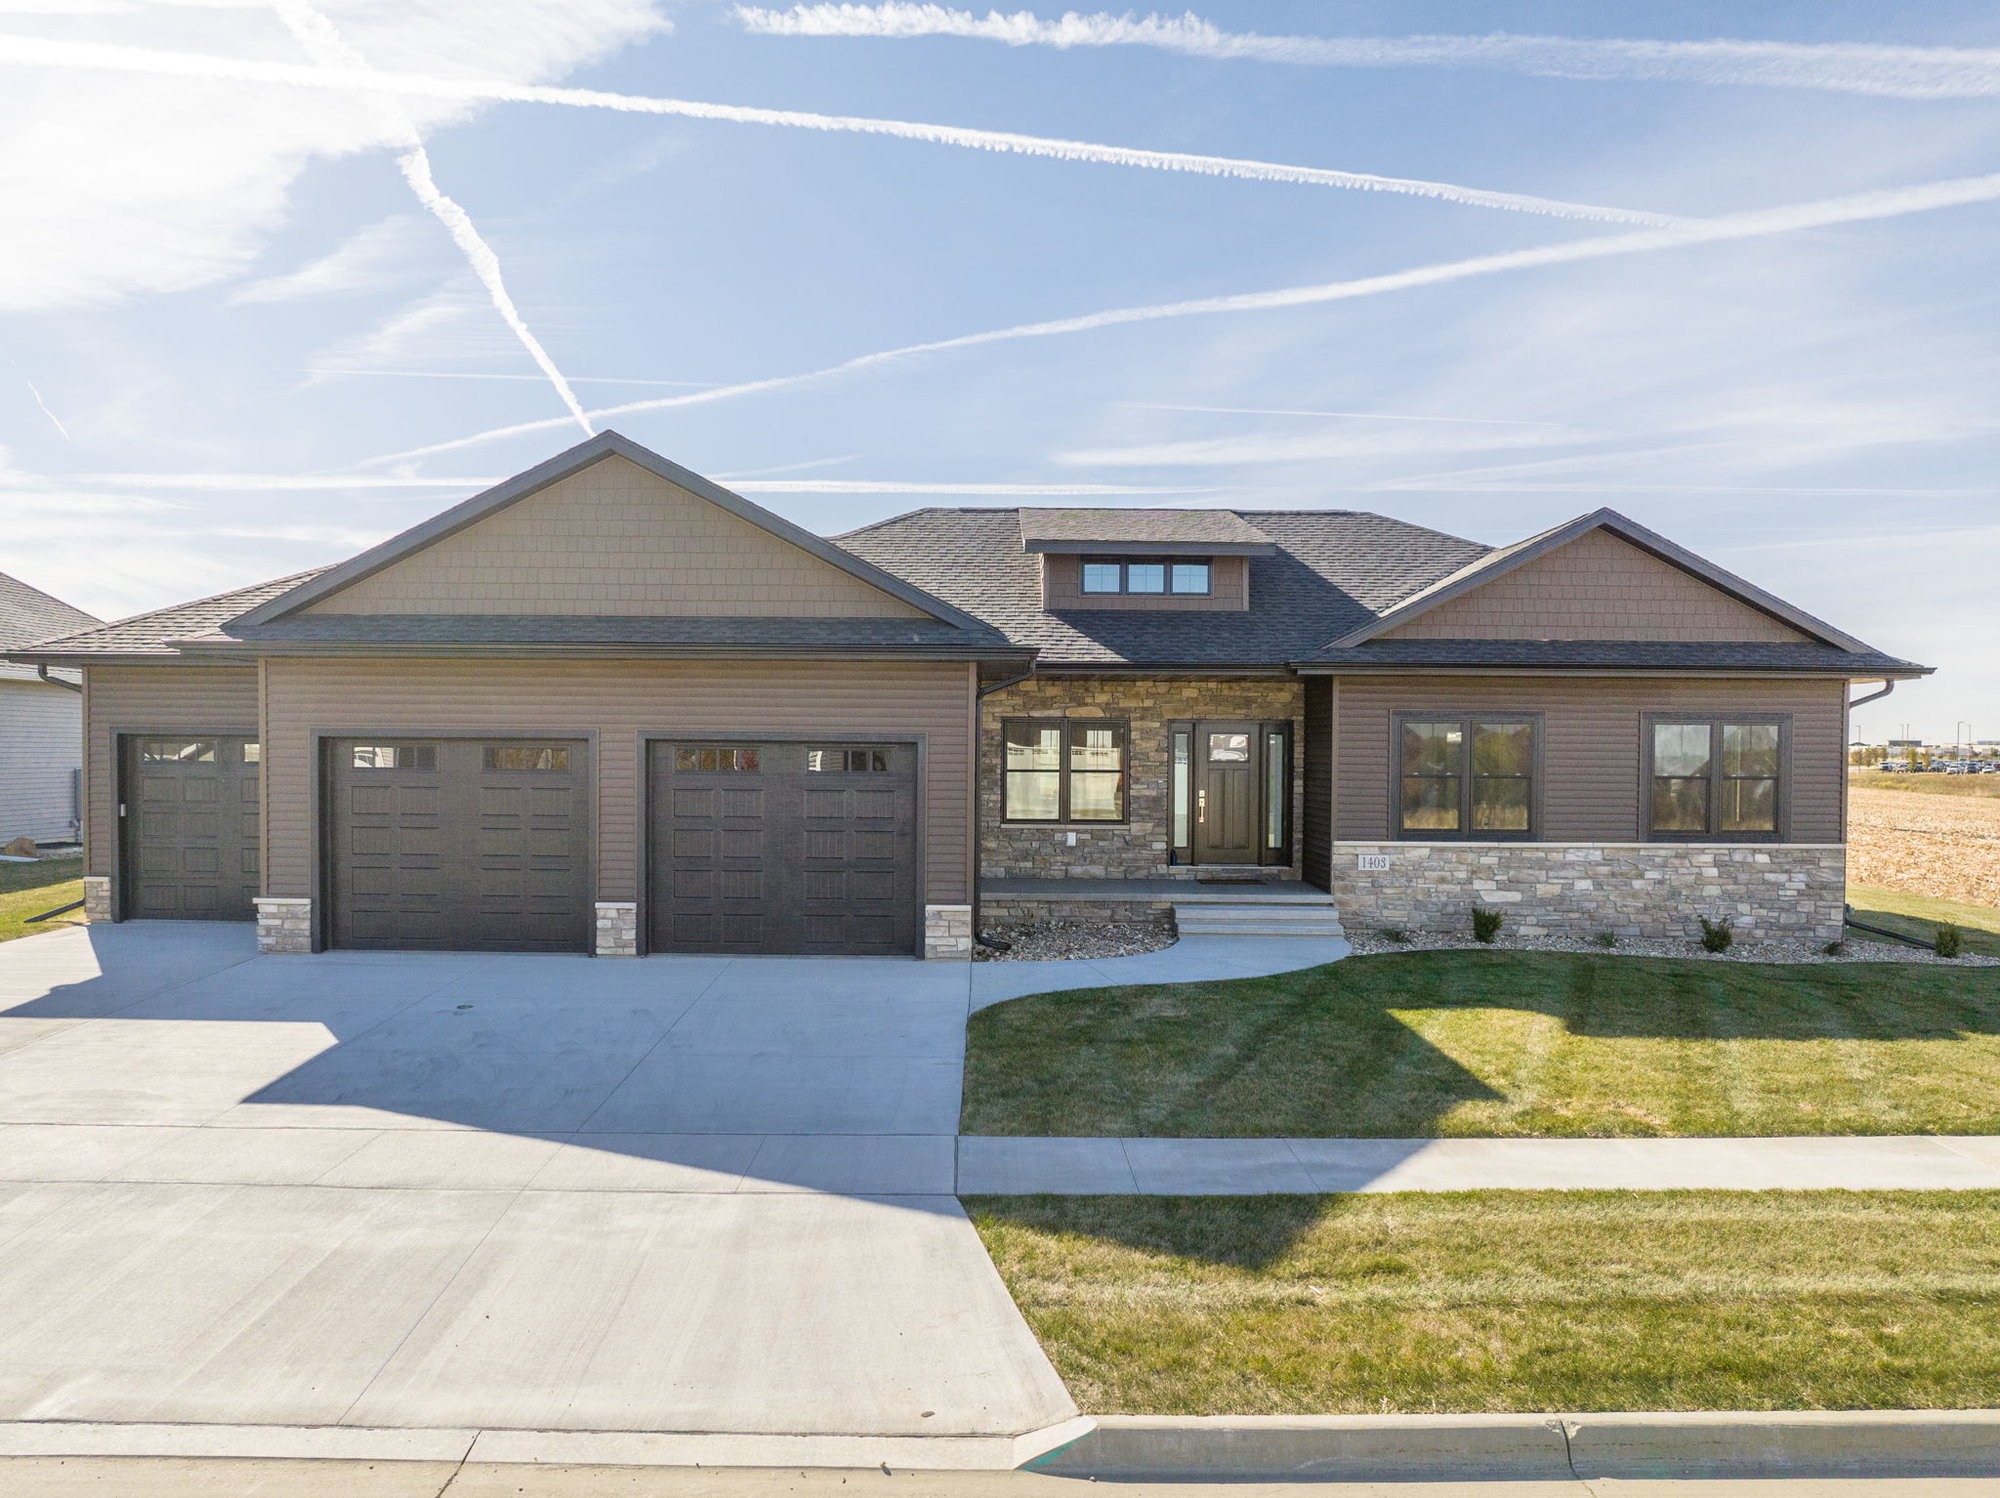 Quality Finishes & Stunning Amenities Throughout - 1403 Green Creek Rd. is Design to Impress!